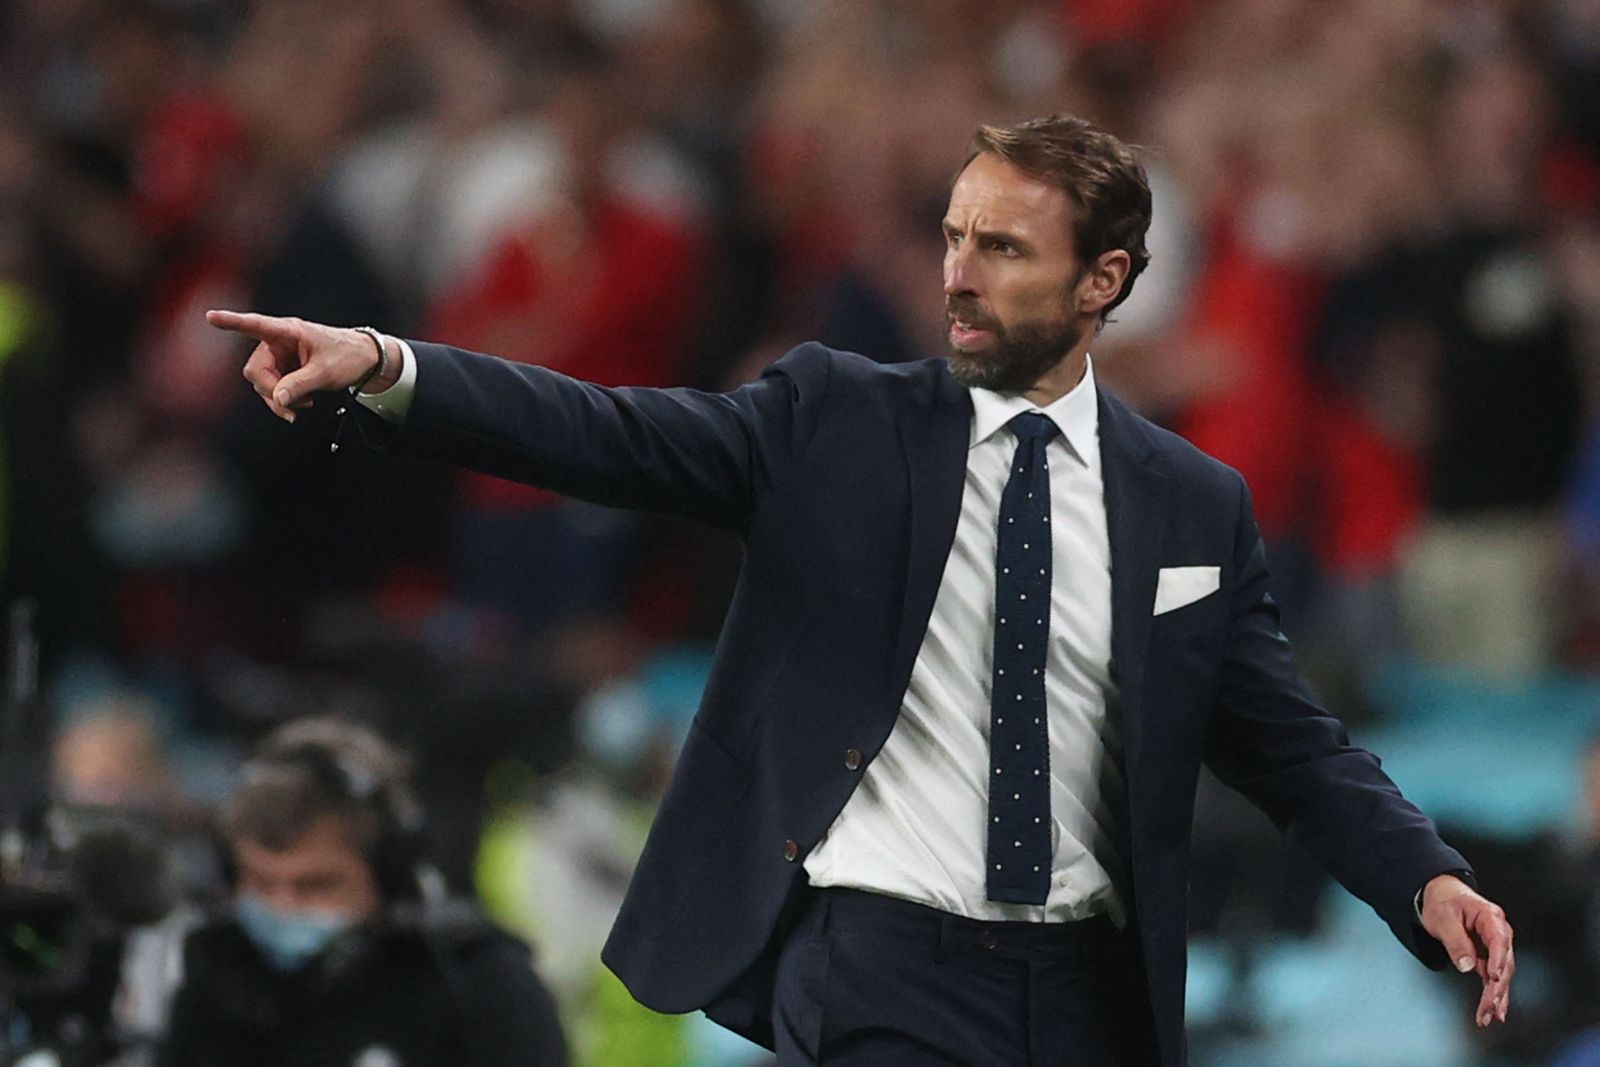 England's coach Gareth Southgate gestures during the UEFA EURO 2020 semi-final football match between England and Denmark at Wembley Stadium in London on July 7, 2021. (Photo by CARL RECINE / POOL / AFP) - AFP